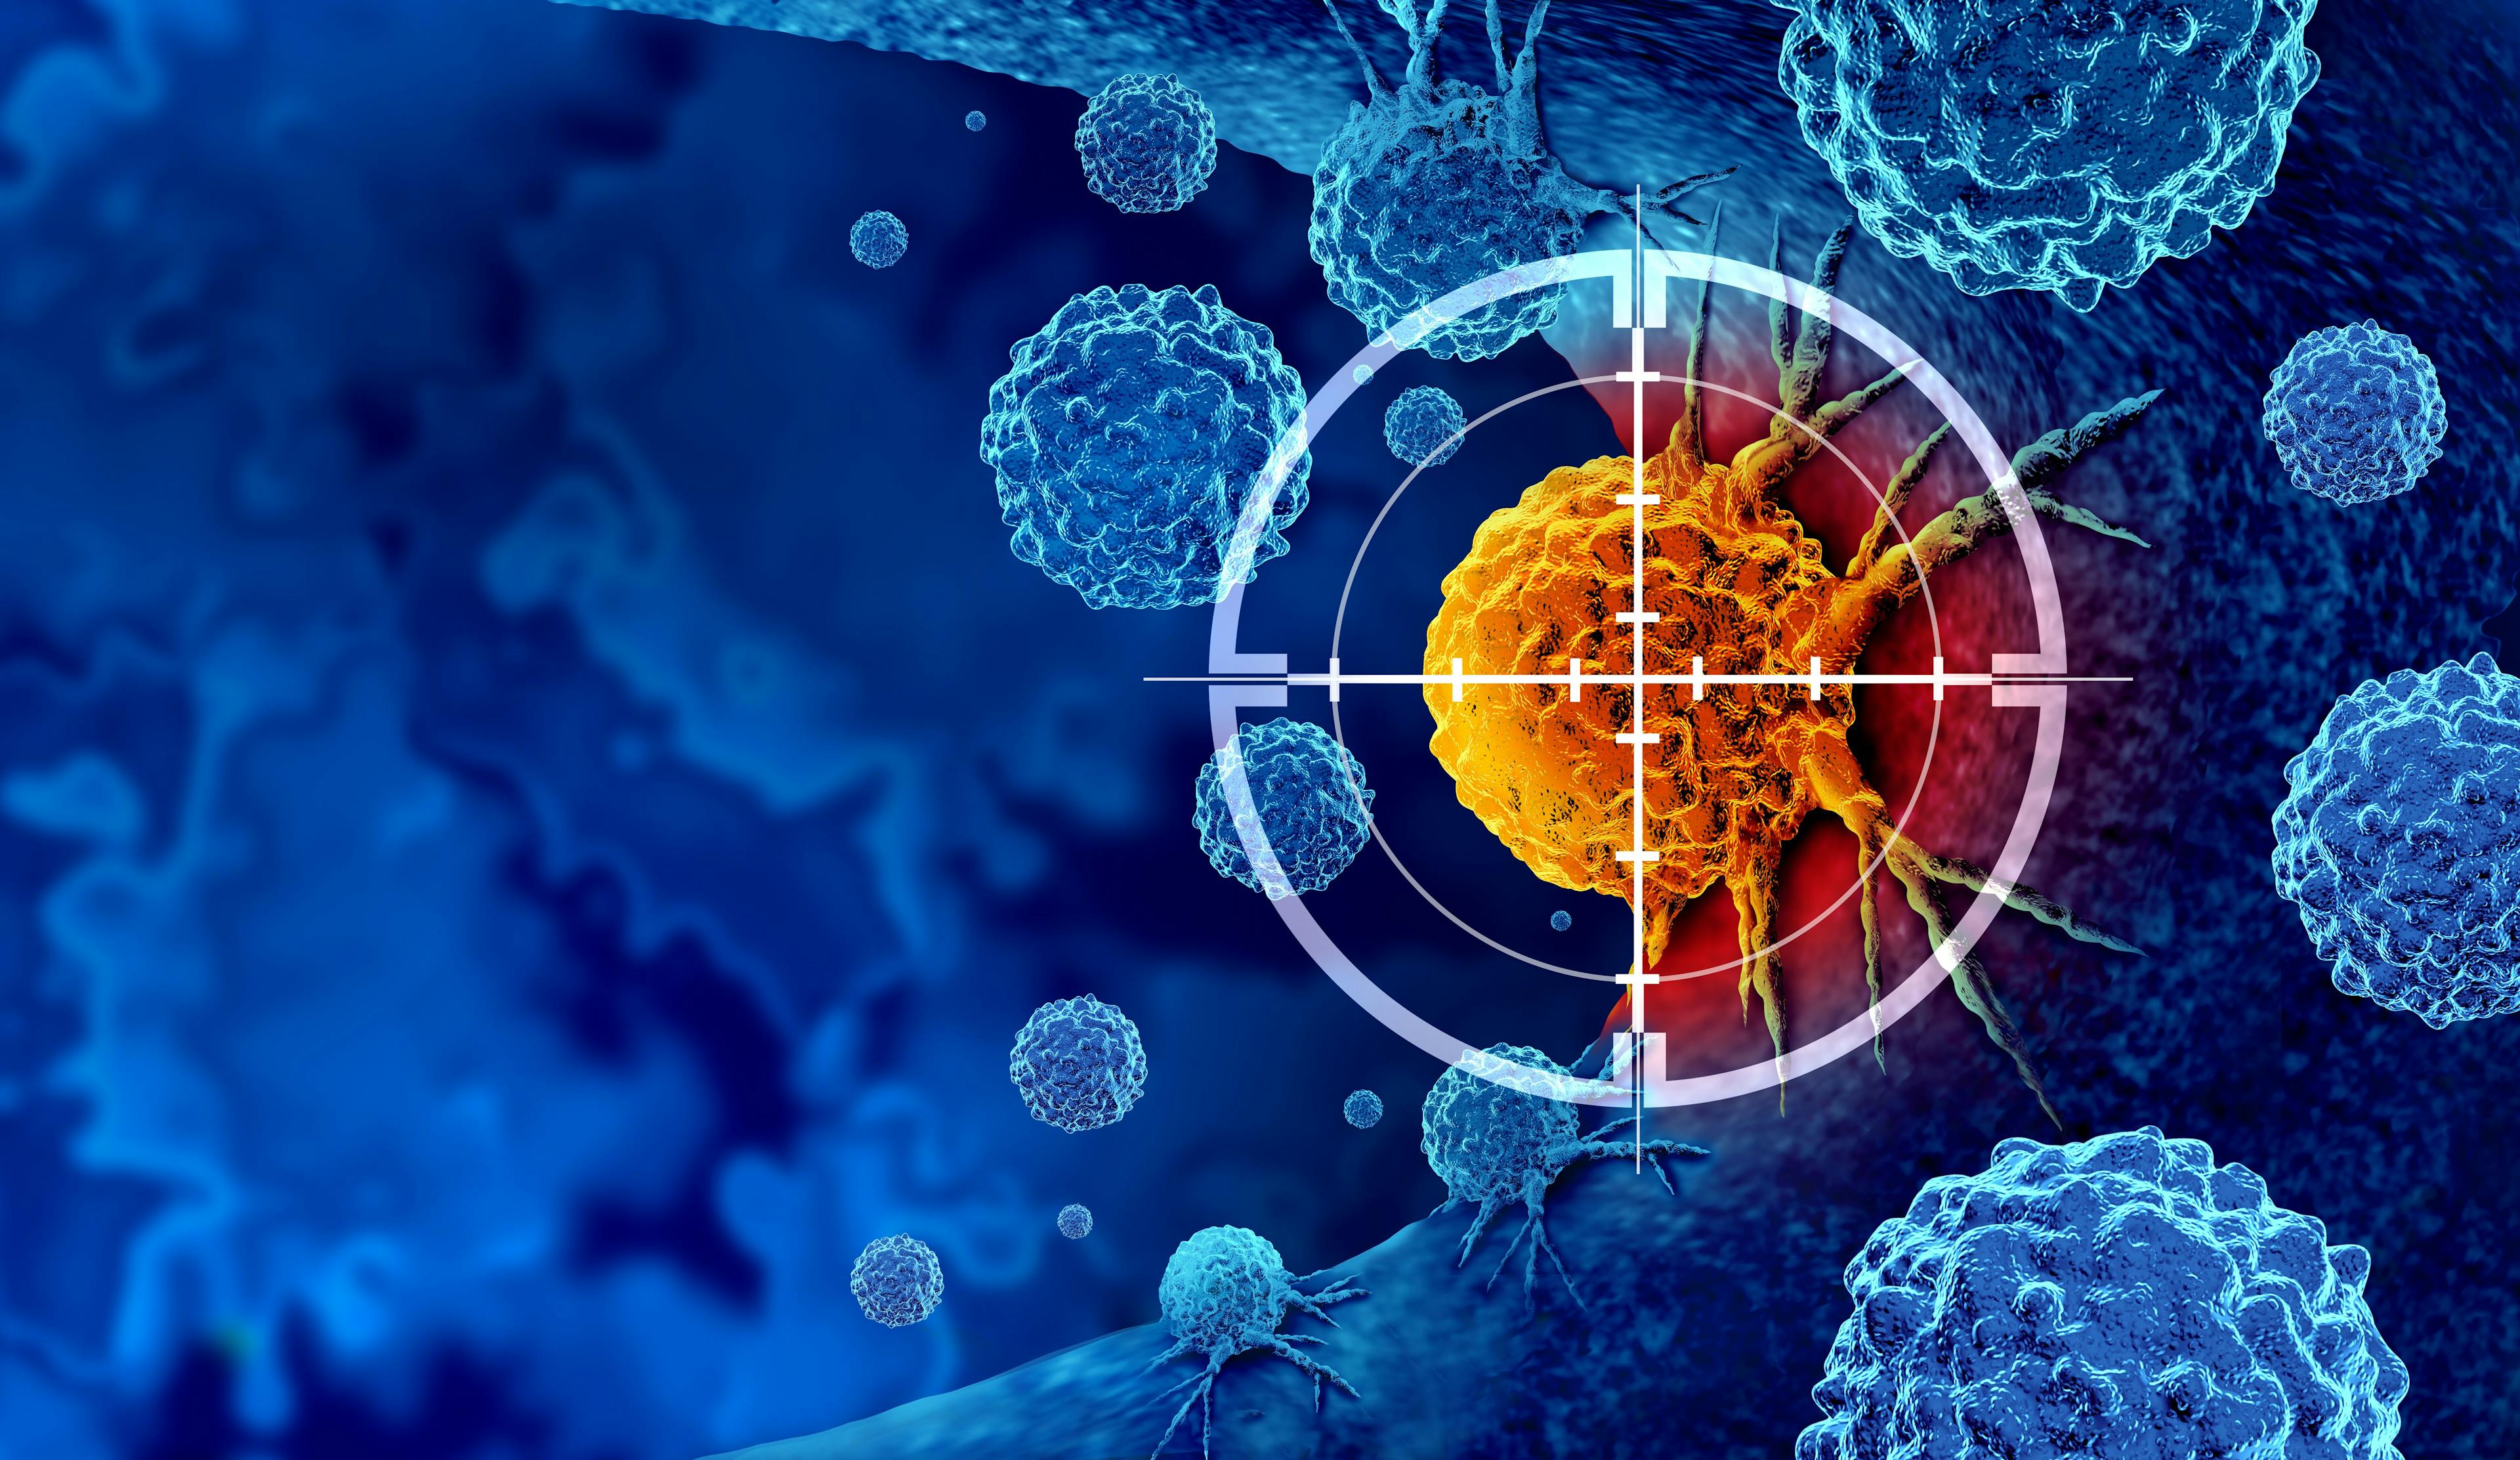 Cancer detection and screening as a treatment for malignant cells with a biopsy or testing caused by carcinogens and genetics with a cancerous cell as an immunotherapy symbol | Image Credit: freshidea - stock.adobe.com